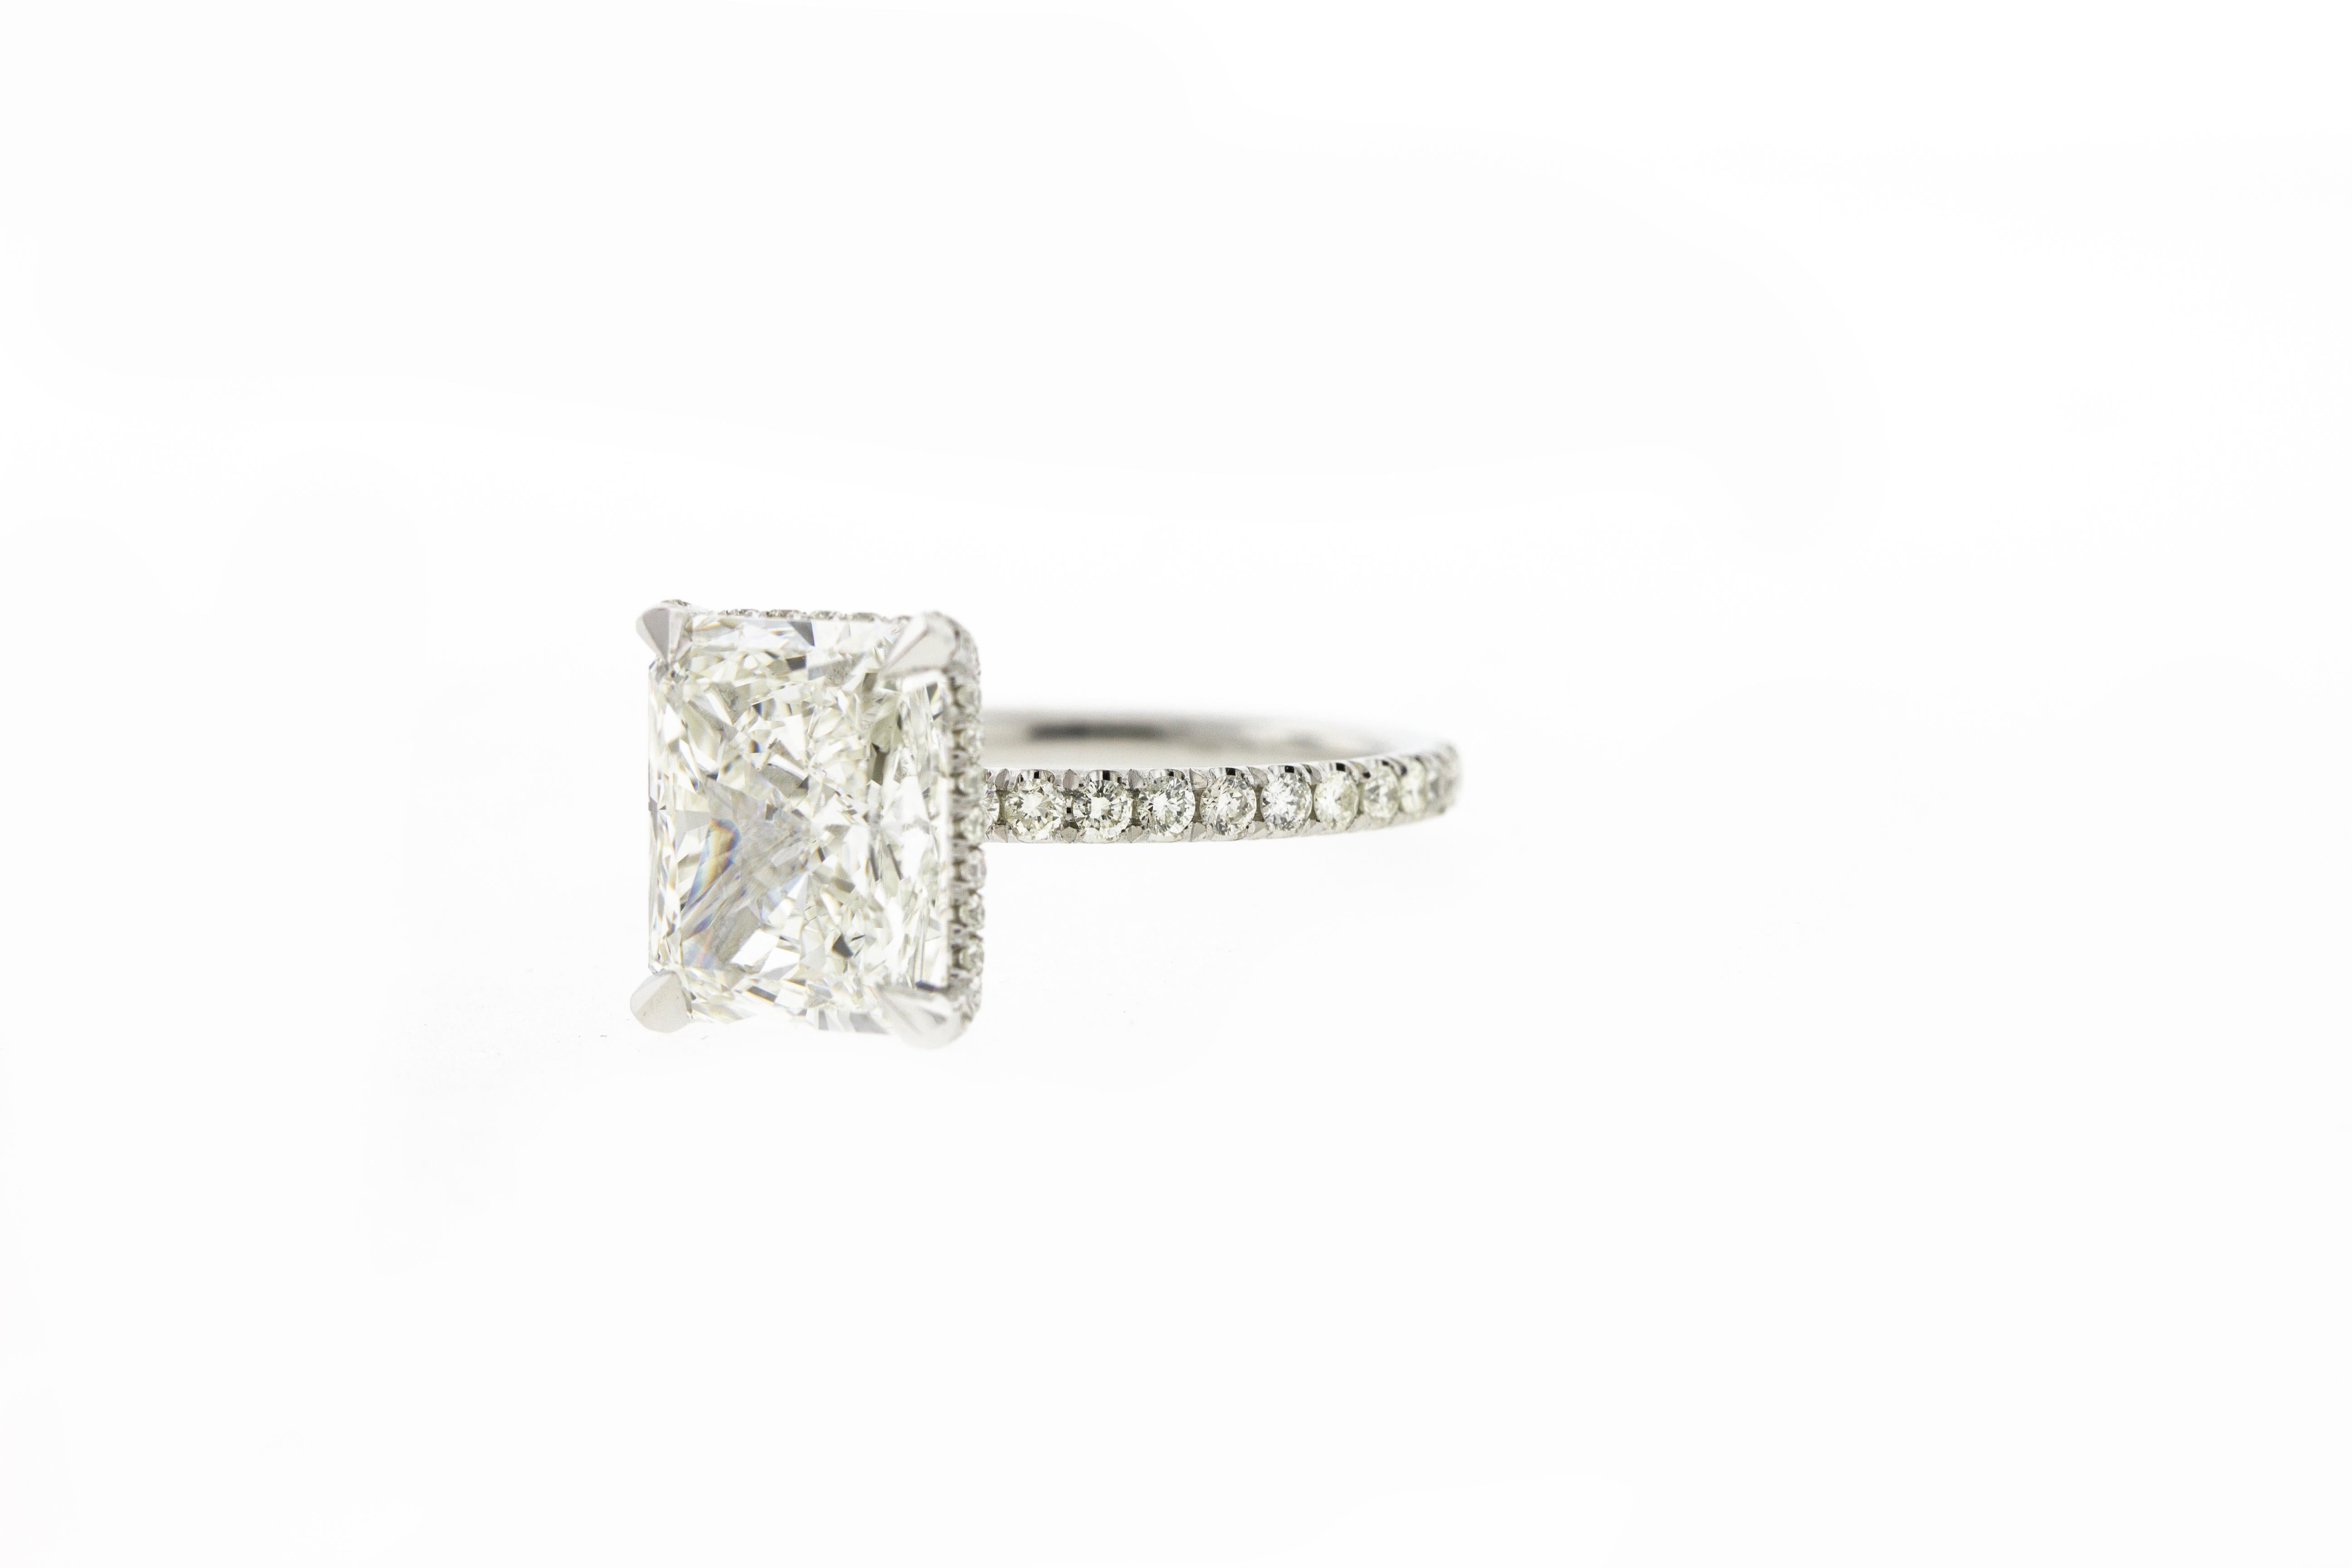 This GIA certified 2 carat radiant cut diamond is mounted on an 18K White Gold setting. The ring features matching diamonds on the legs (underside) of the rings basket and diamond pave on the shank.